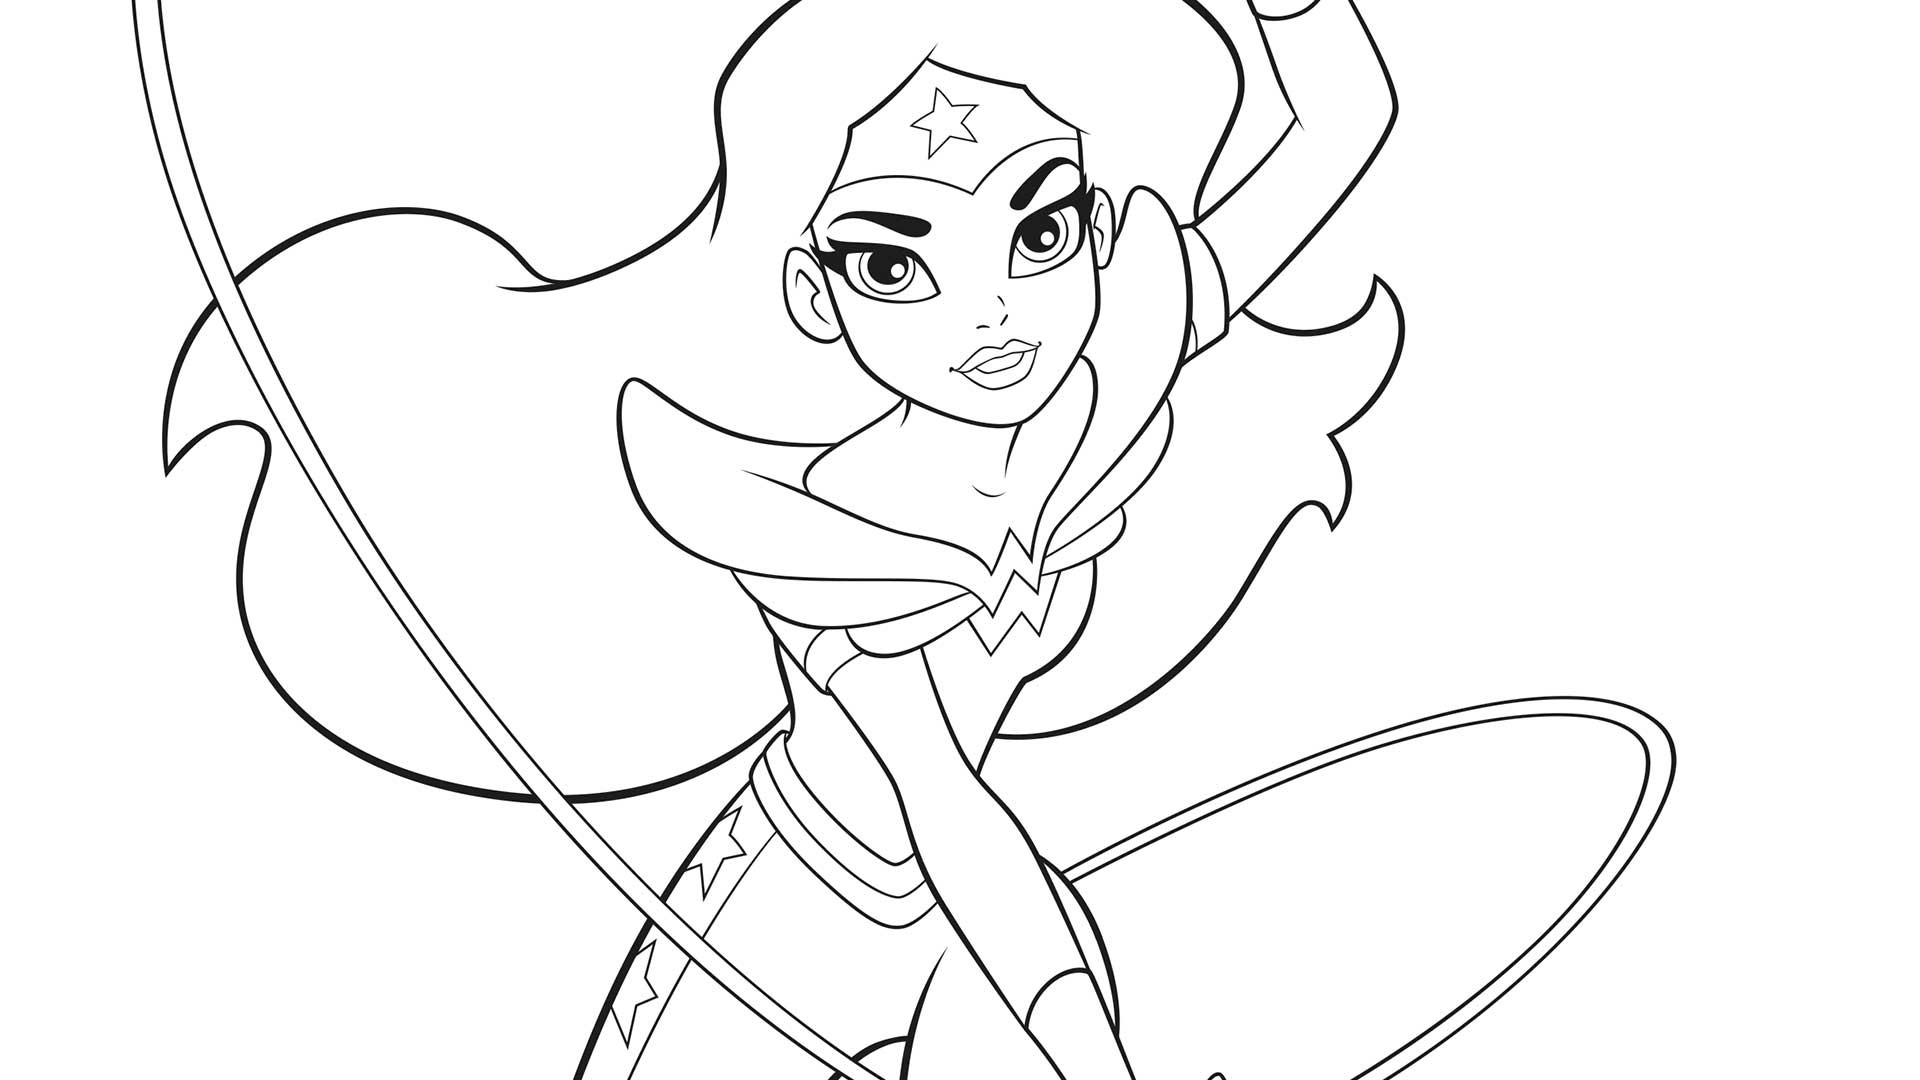 Dc Superhero Girls Coloring Pages
 DC SUPER HERO GIRLS A KIDS COLORING BOOK